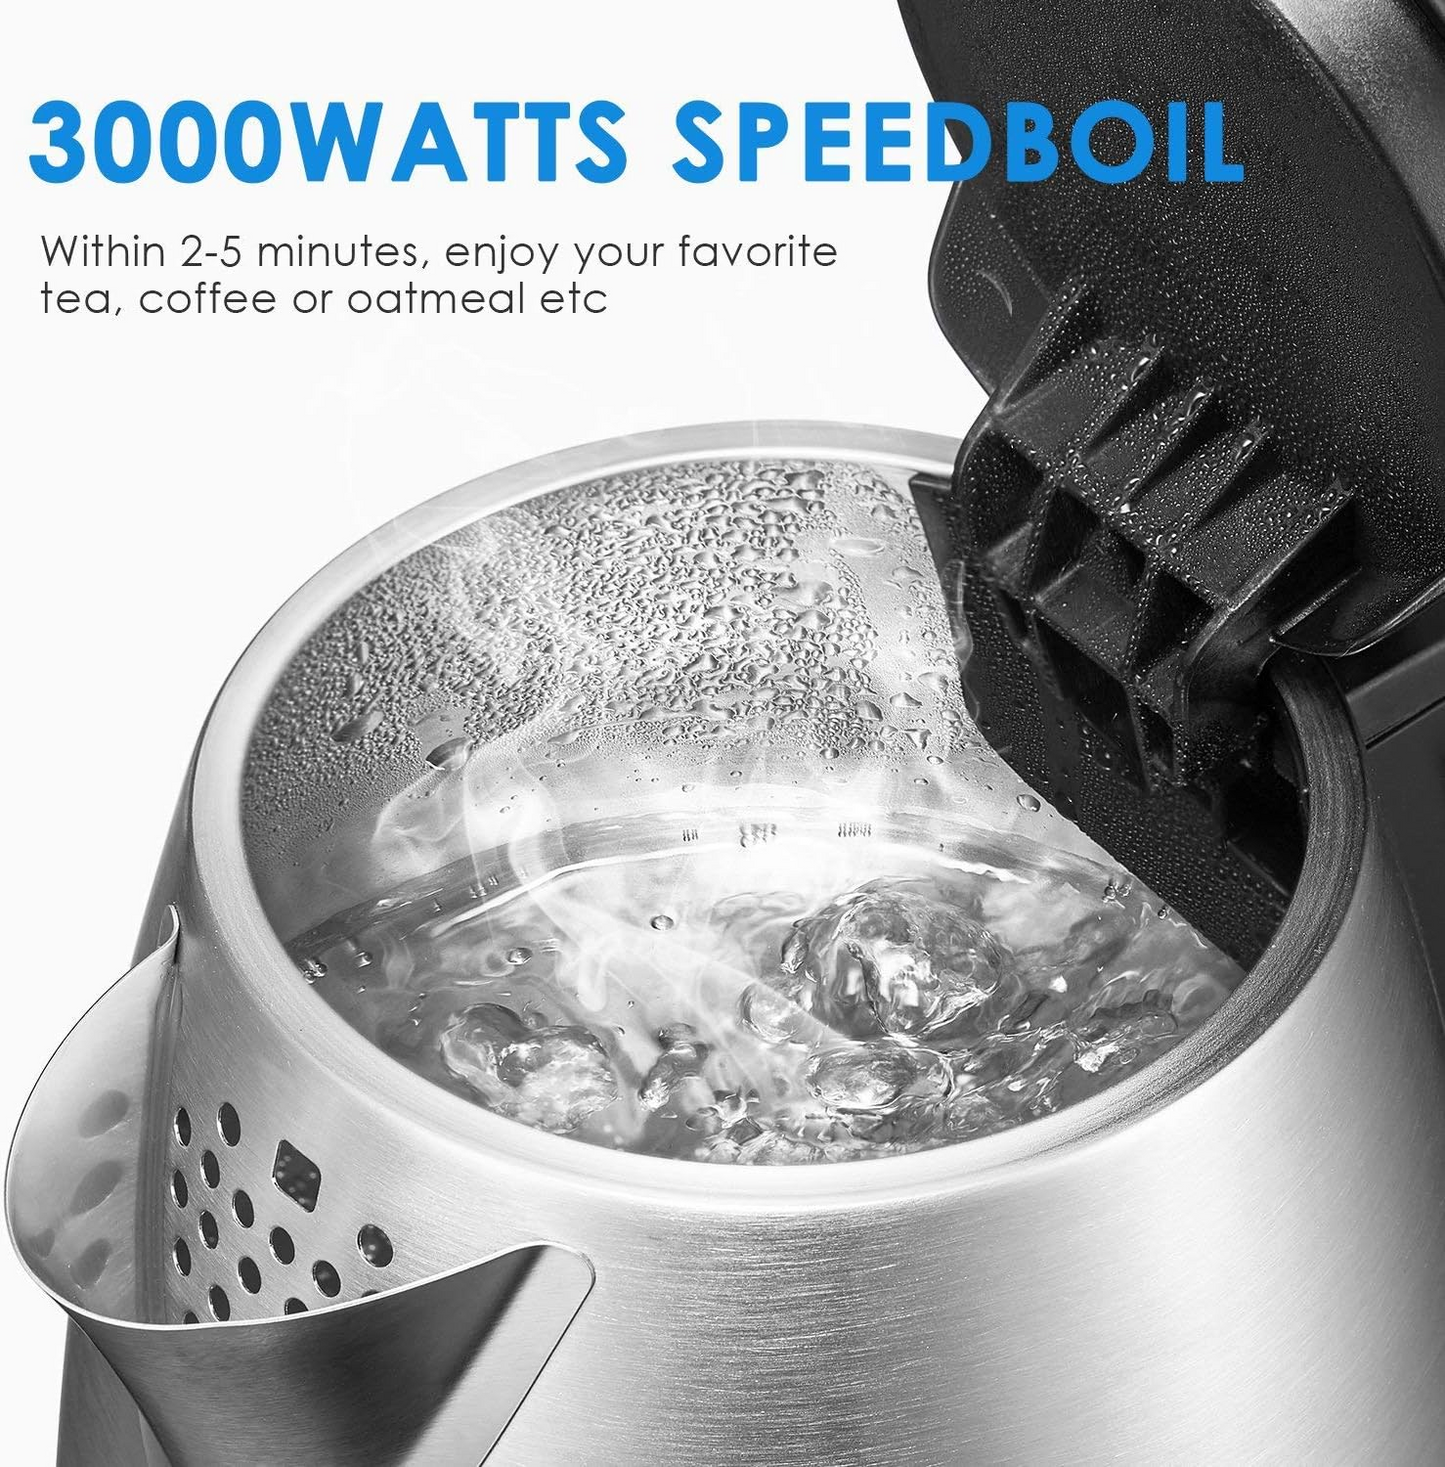 3000W Fast Boil Kettle, FOHERE Stainless Steel Cordless Electric Kettle, BPA-Free Hot Water Boiler, 1.7 Liter, Removable Washable Filter, Boil Dry Protection & Auto Shut Off, Silver